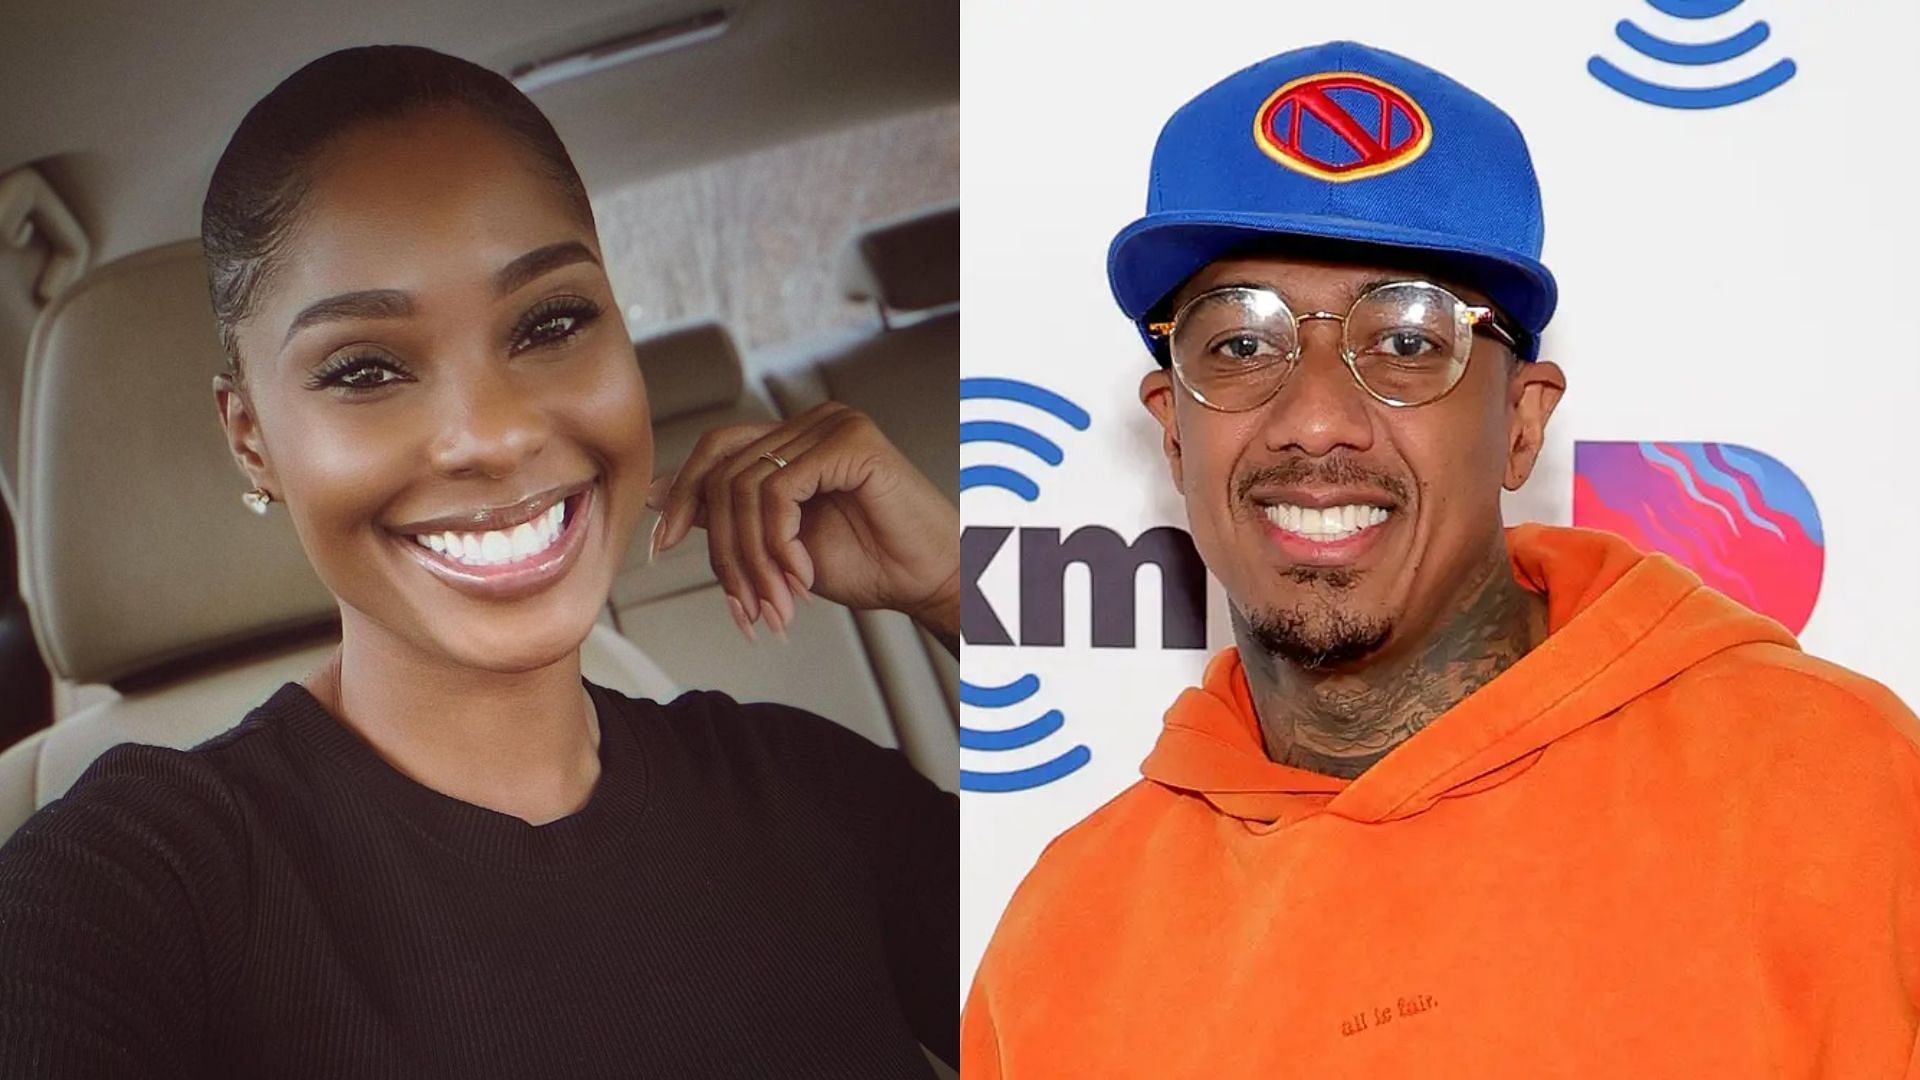 Nick Cannot and Lanisha Cole welcomed a baby. (Images via Instagram/misslanishacole and Cindy Ord/Getty Images)